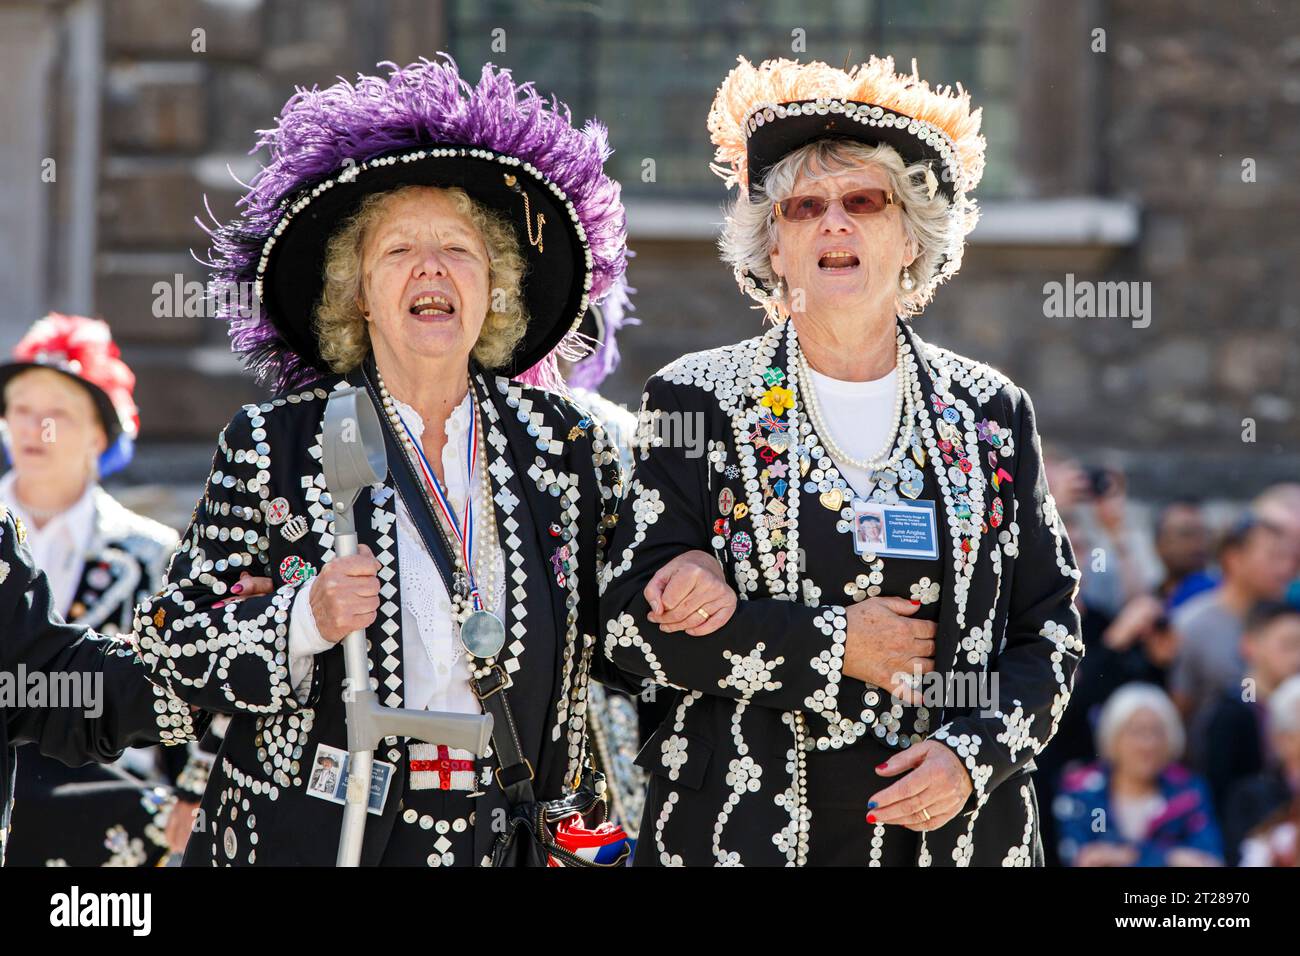 Pearly Queens at the Pearly Kings and Queens Harvest Festival at Guildhall Yard, London, England. Stock Photo